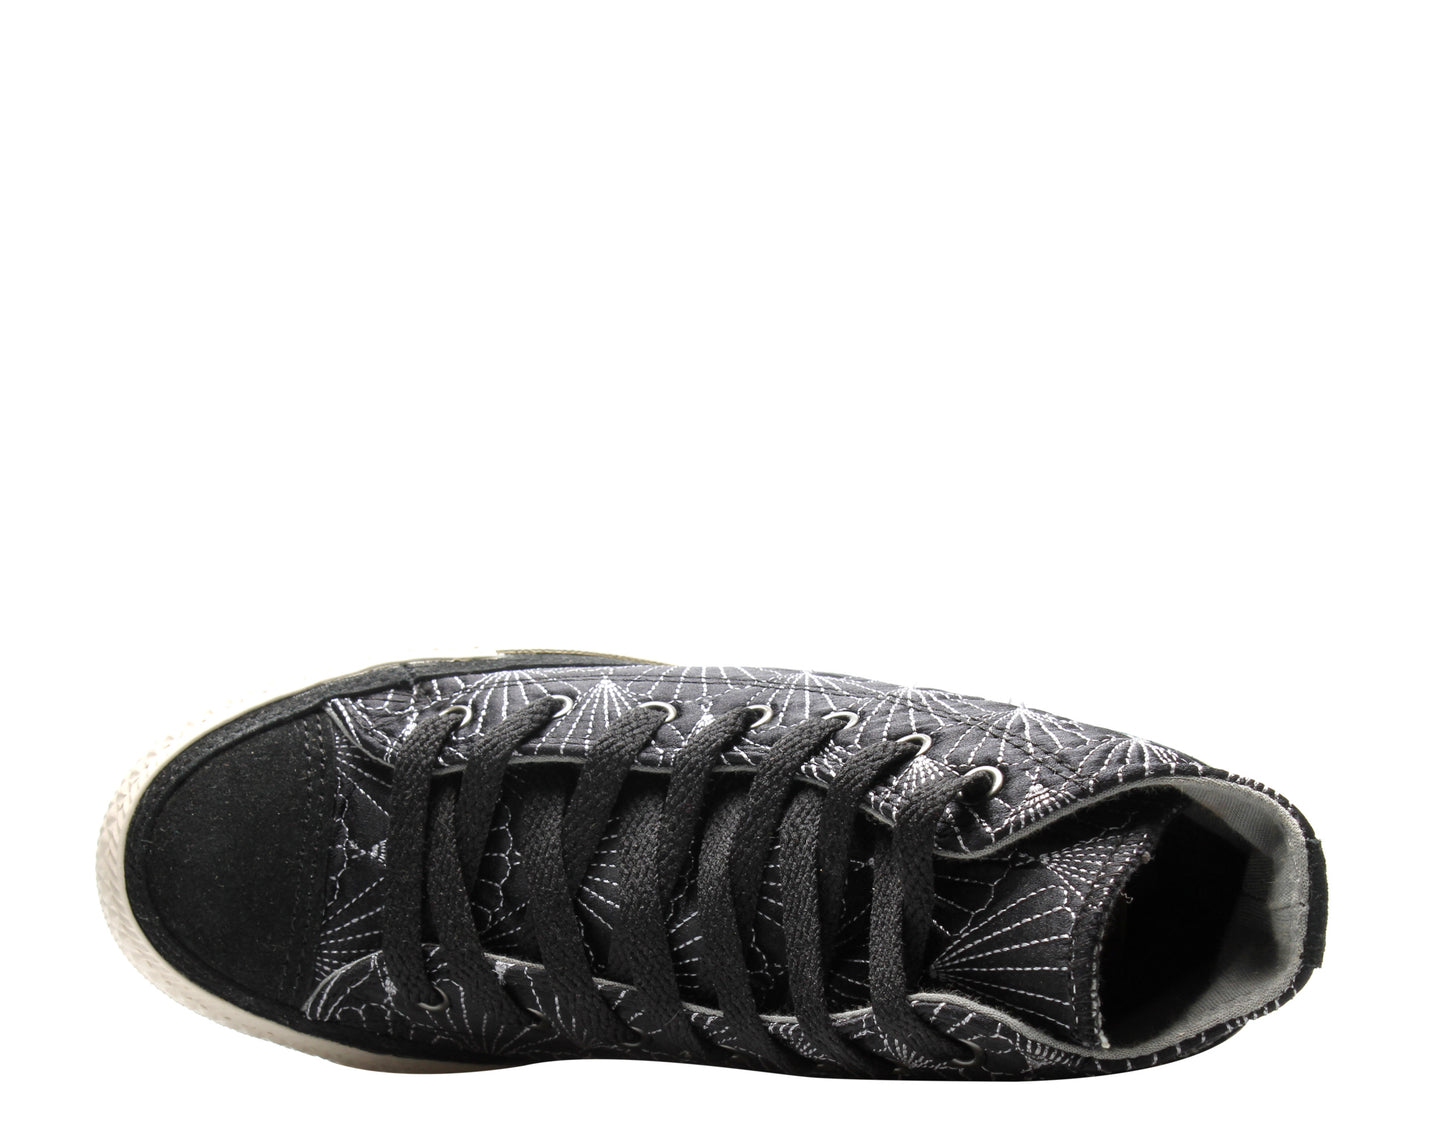 Converse Chuck Taylor Quilted Hi Shells Black/Parchment Sneakers 100101